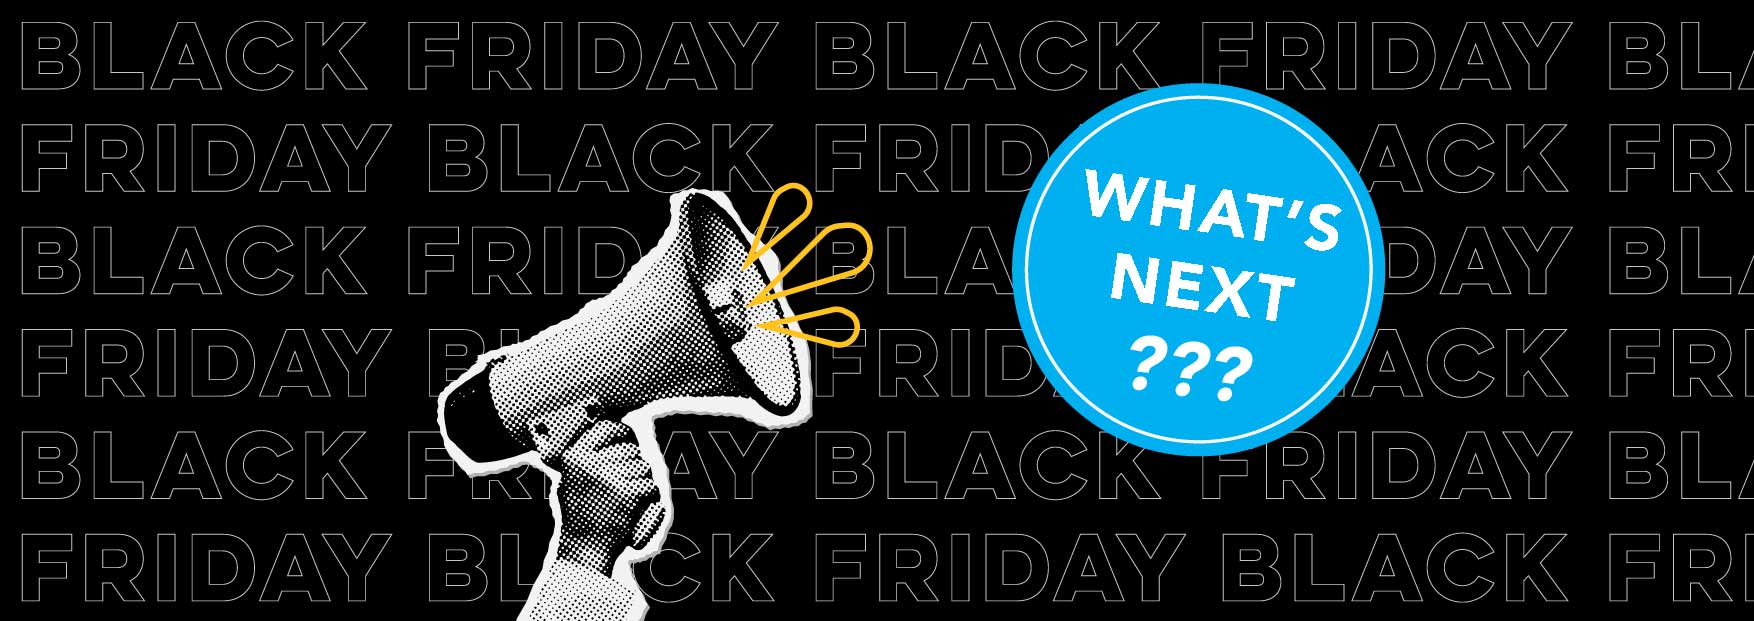 Black Friday: Once the dust has settled, what comes next?